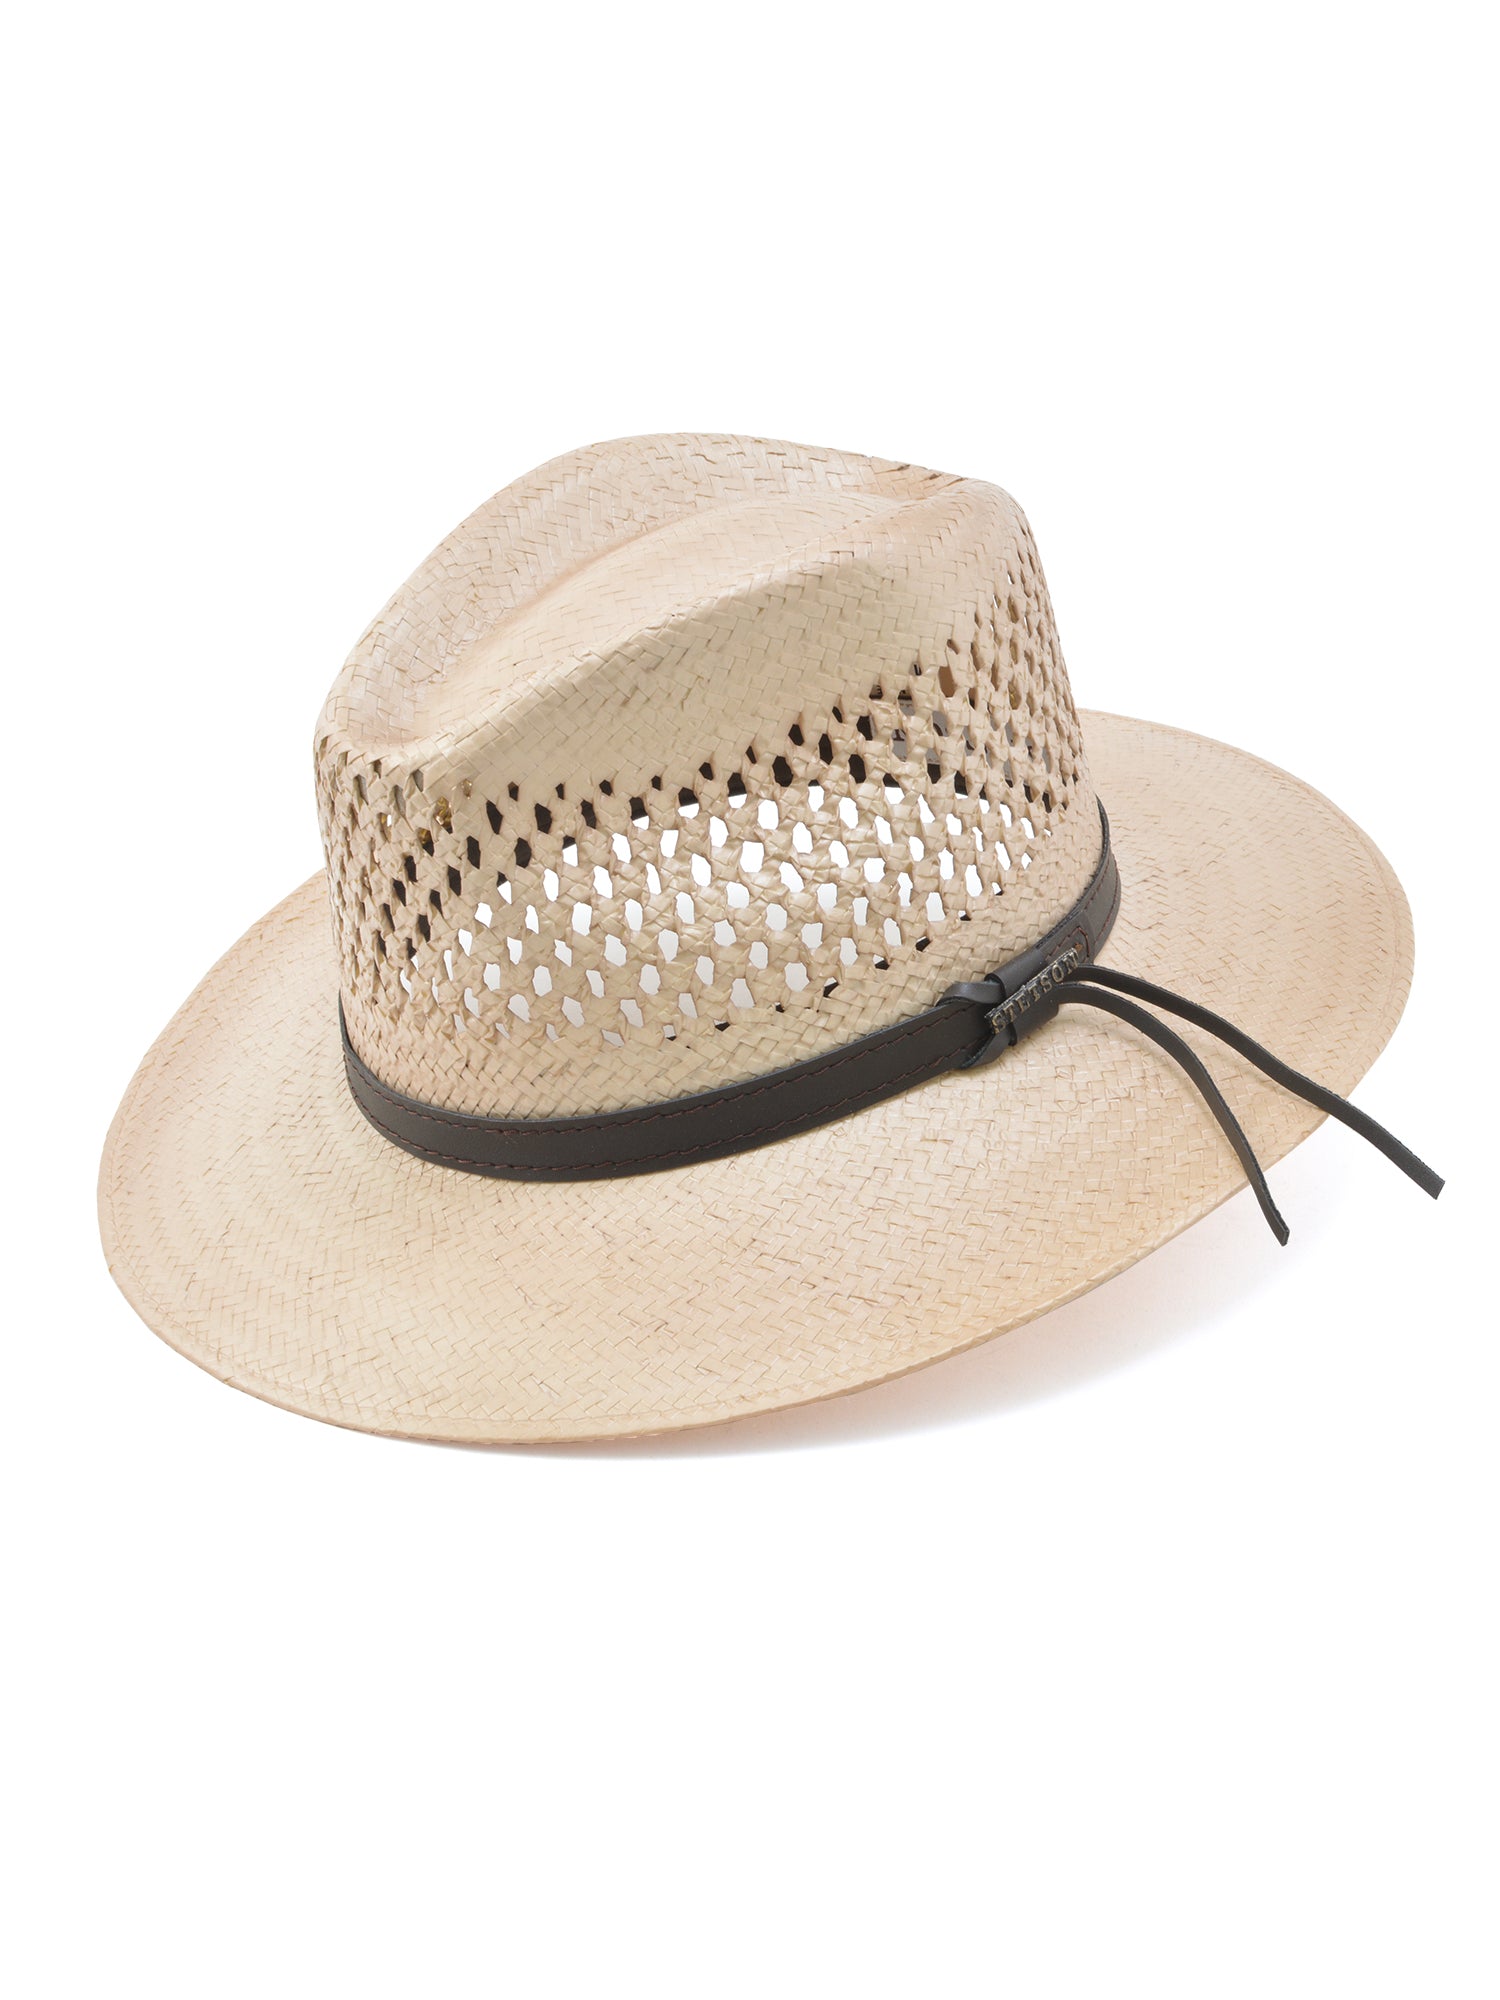 Stetson Shantung Straw Peak View Vented Hat in Copper